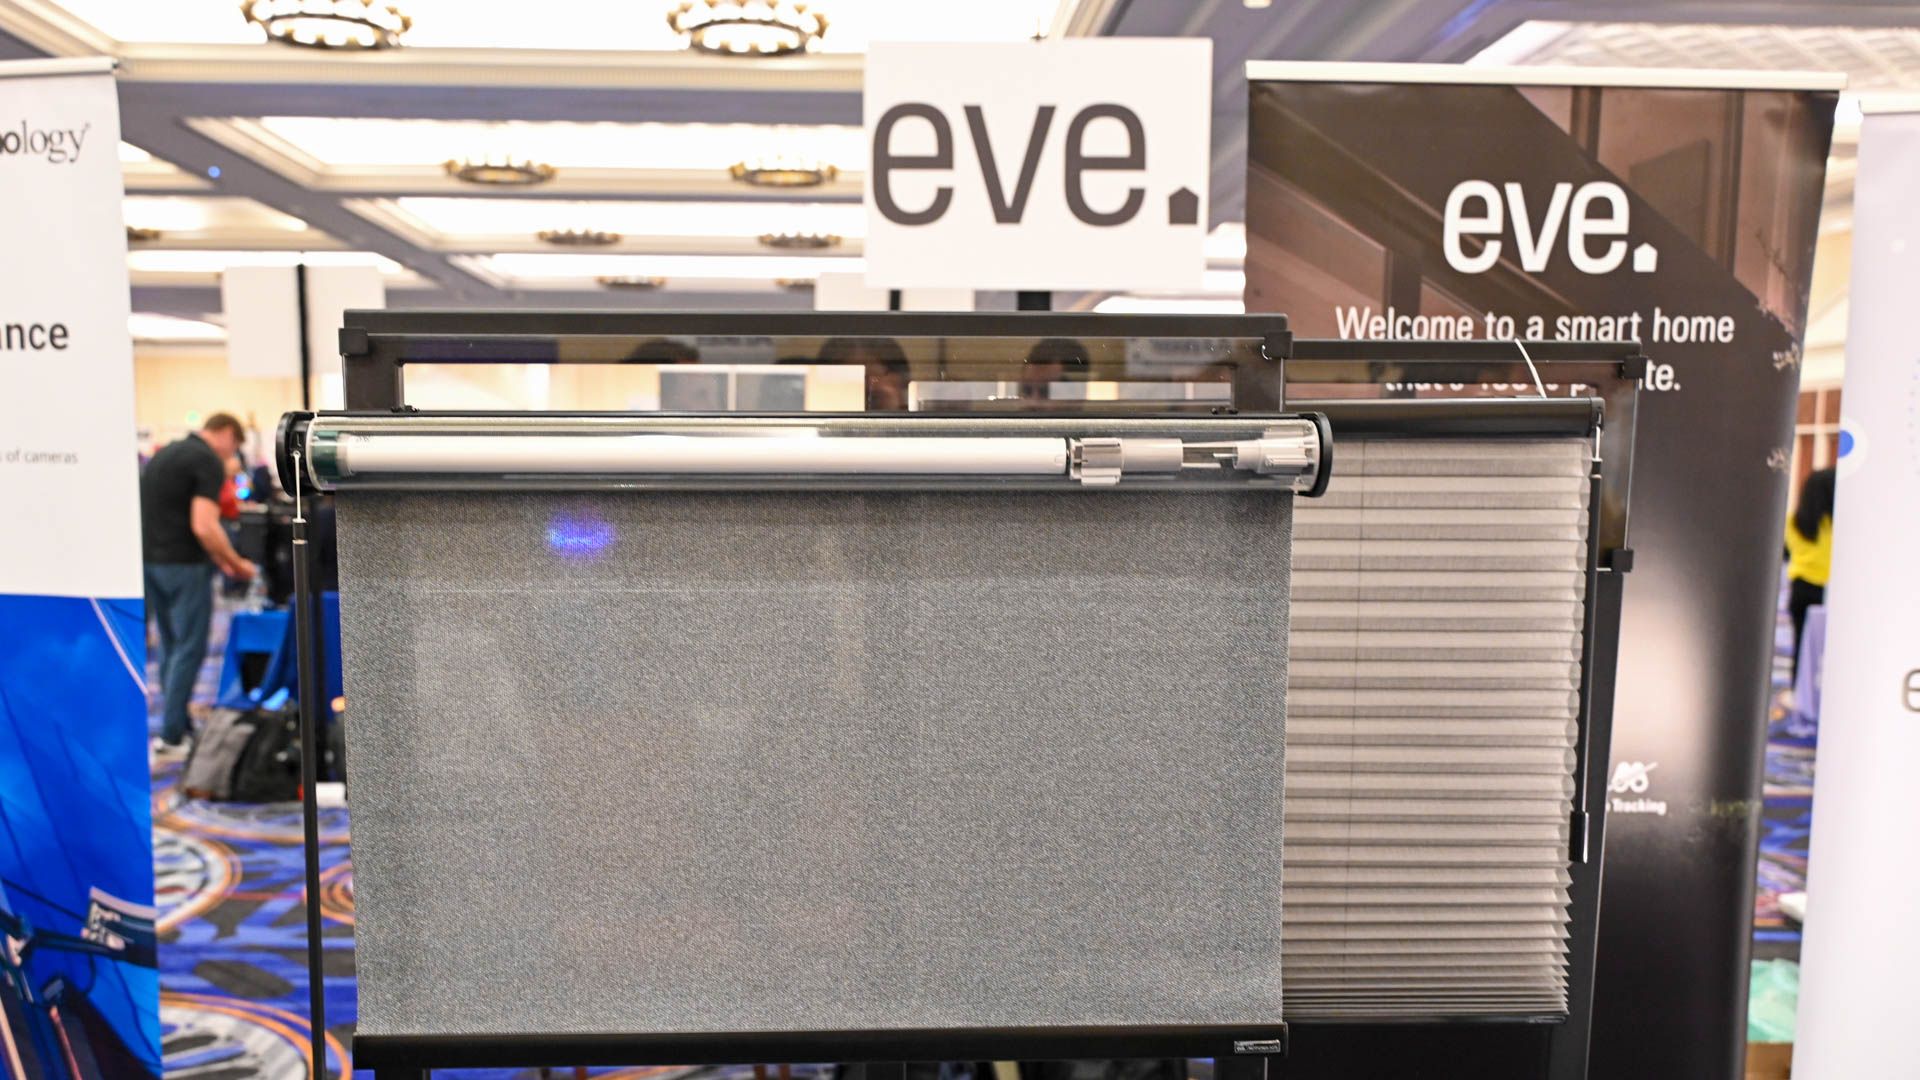 Eve MotionBlinds Upgrade Kit at CES 2023